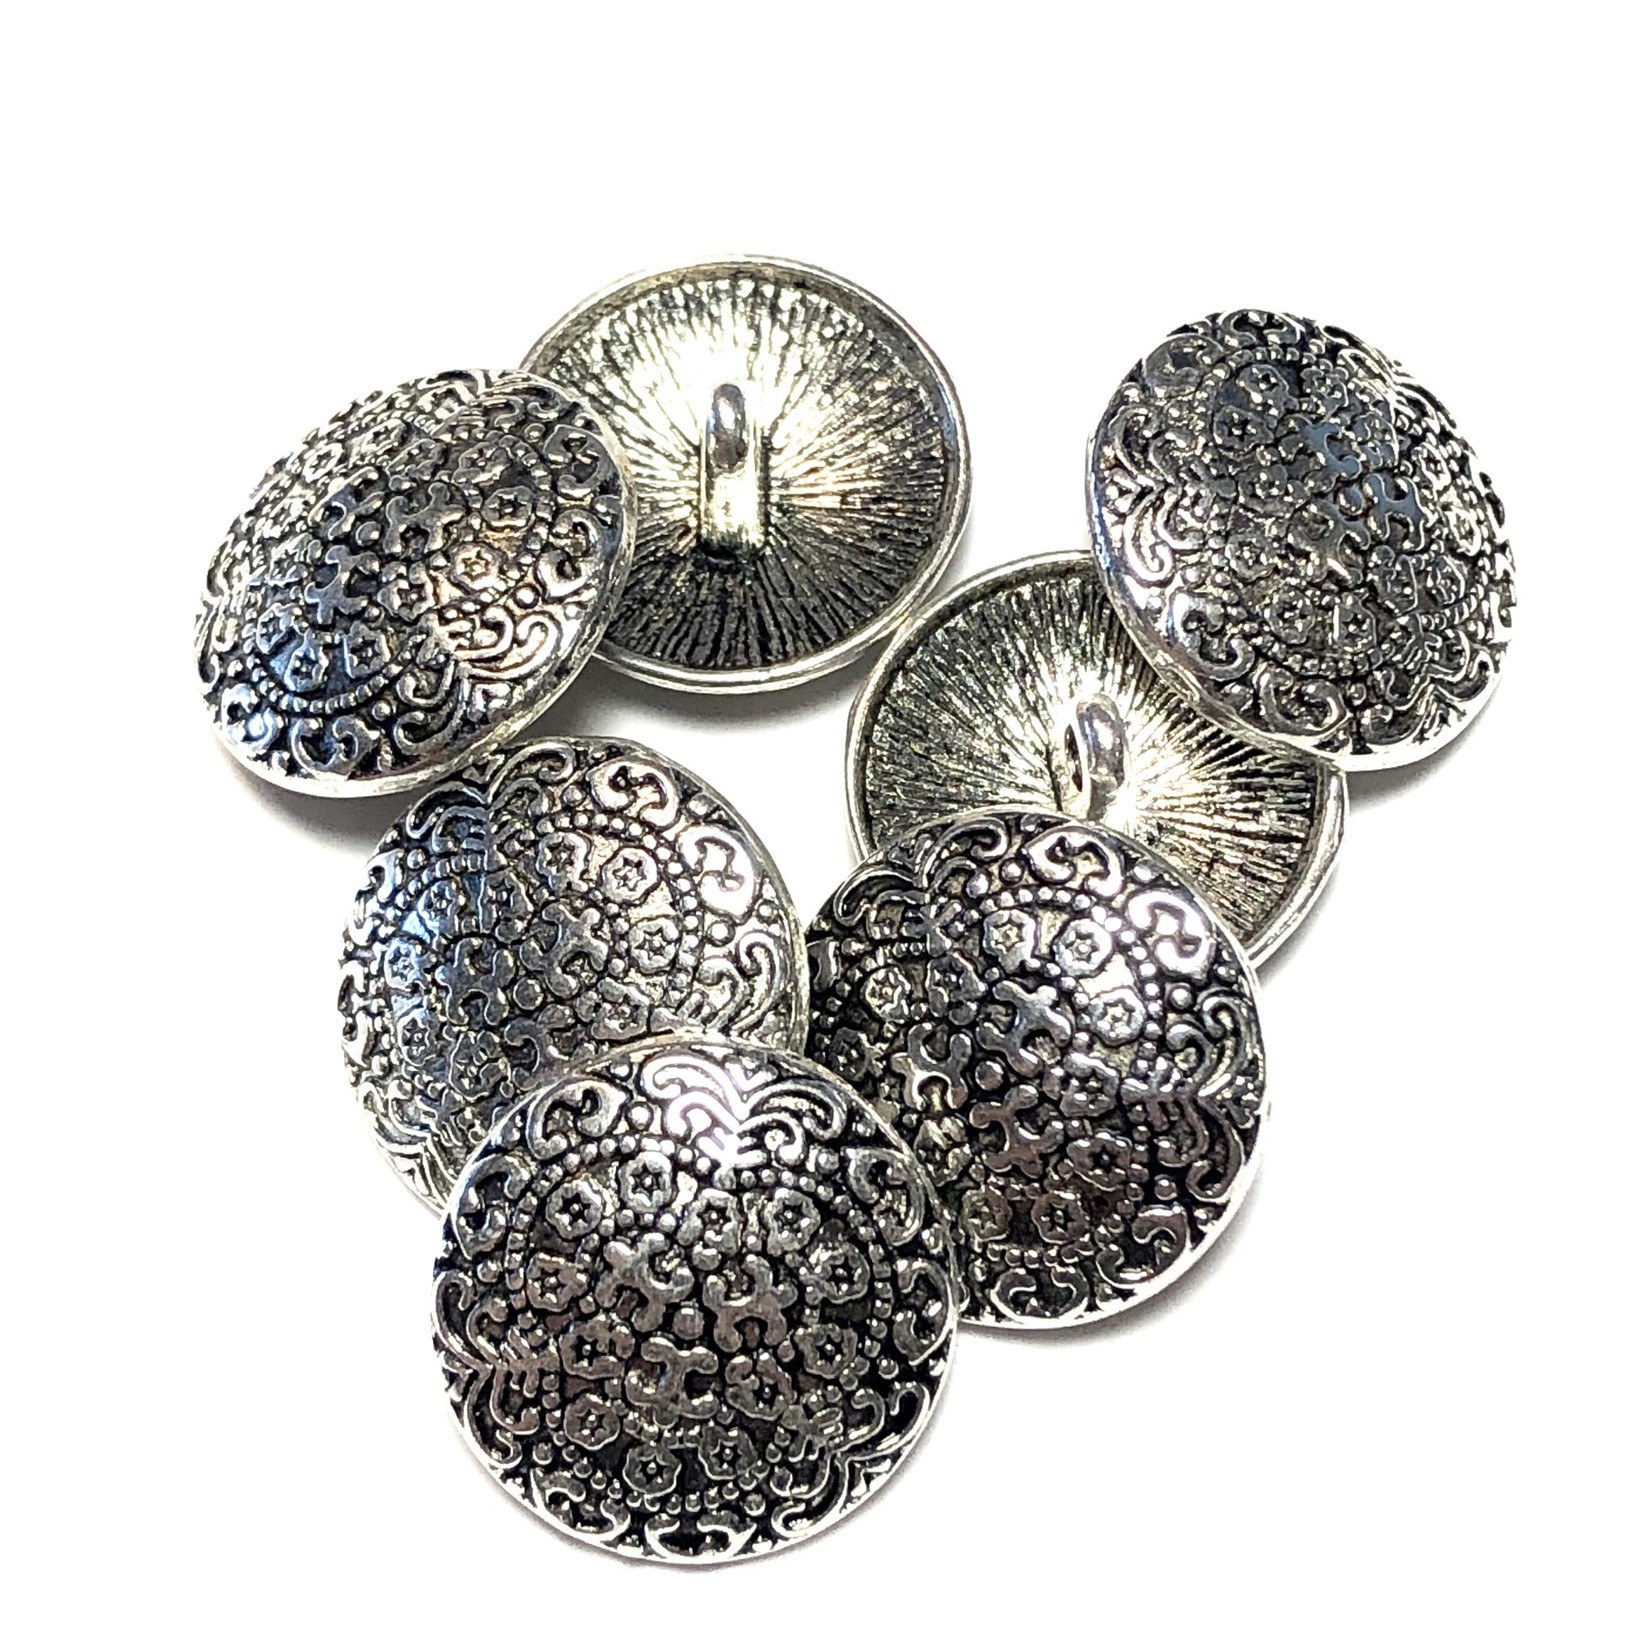 Carved Tibetan Silver Alloy 18mm Button 10pcs